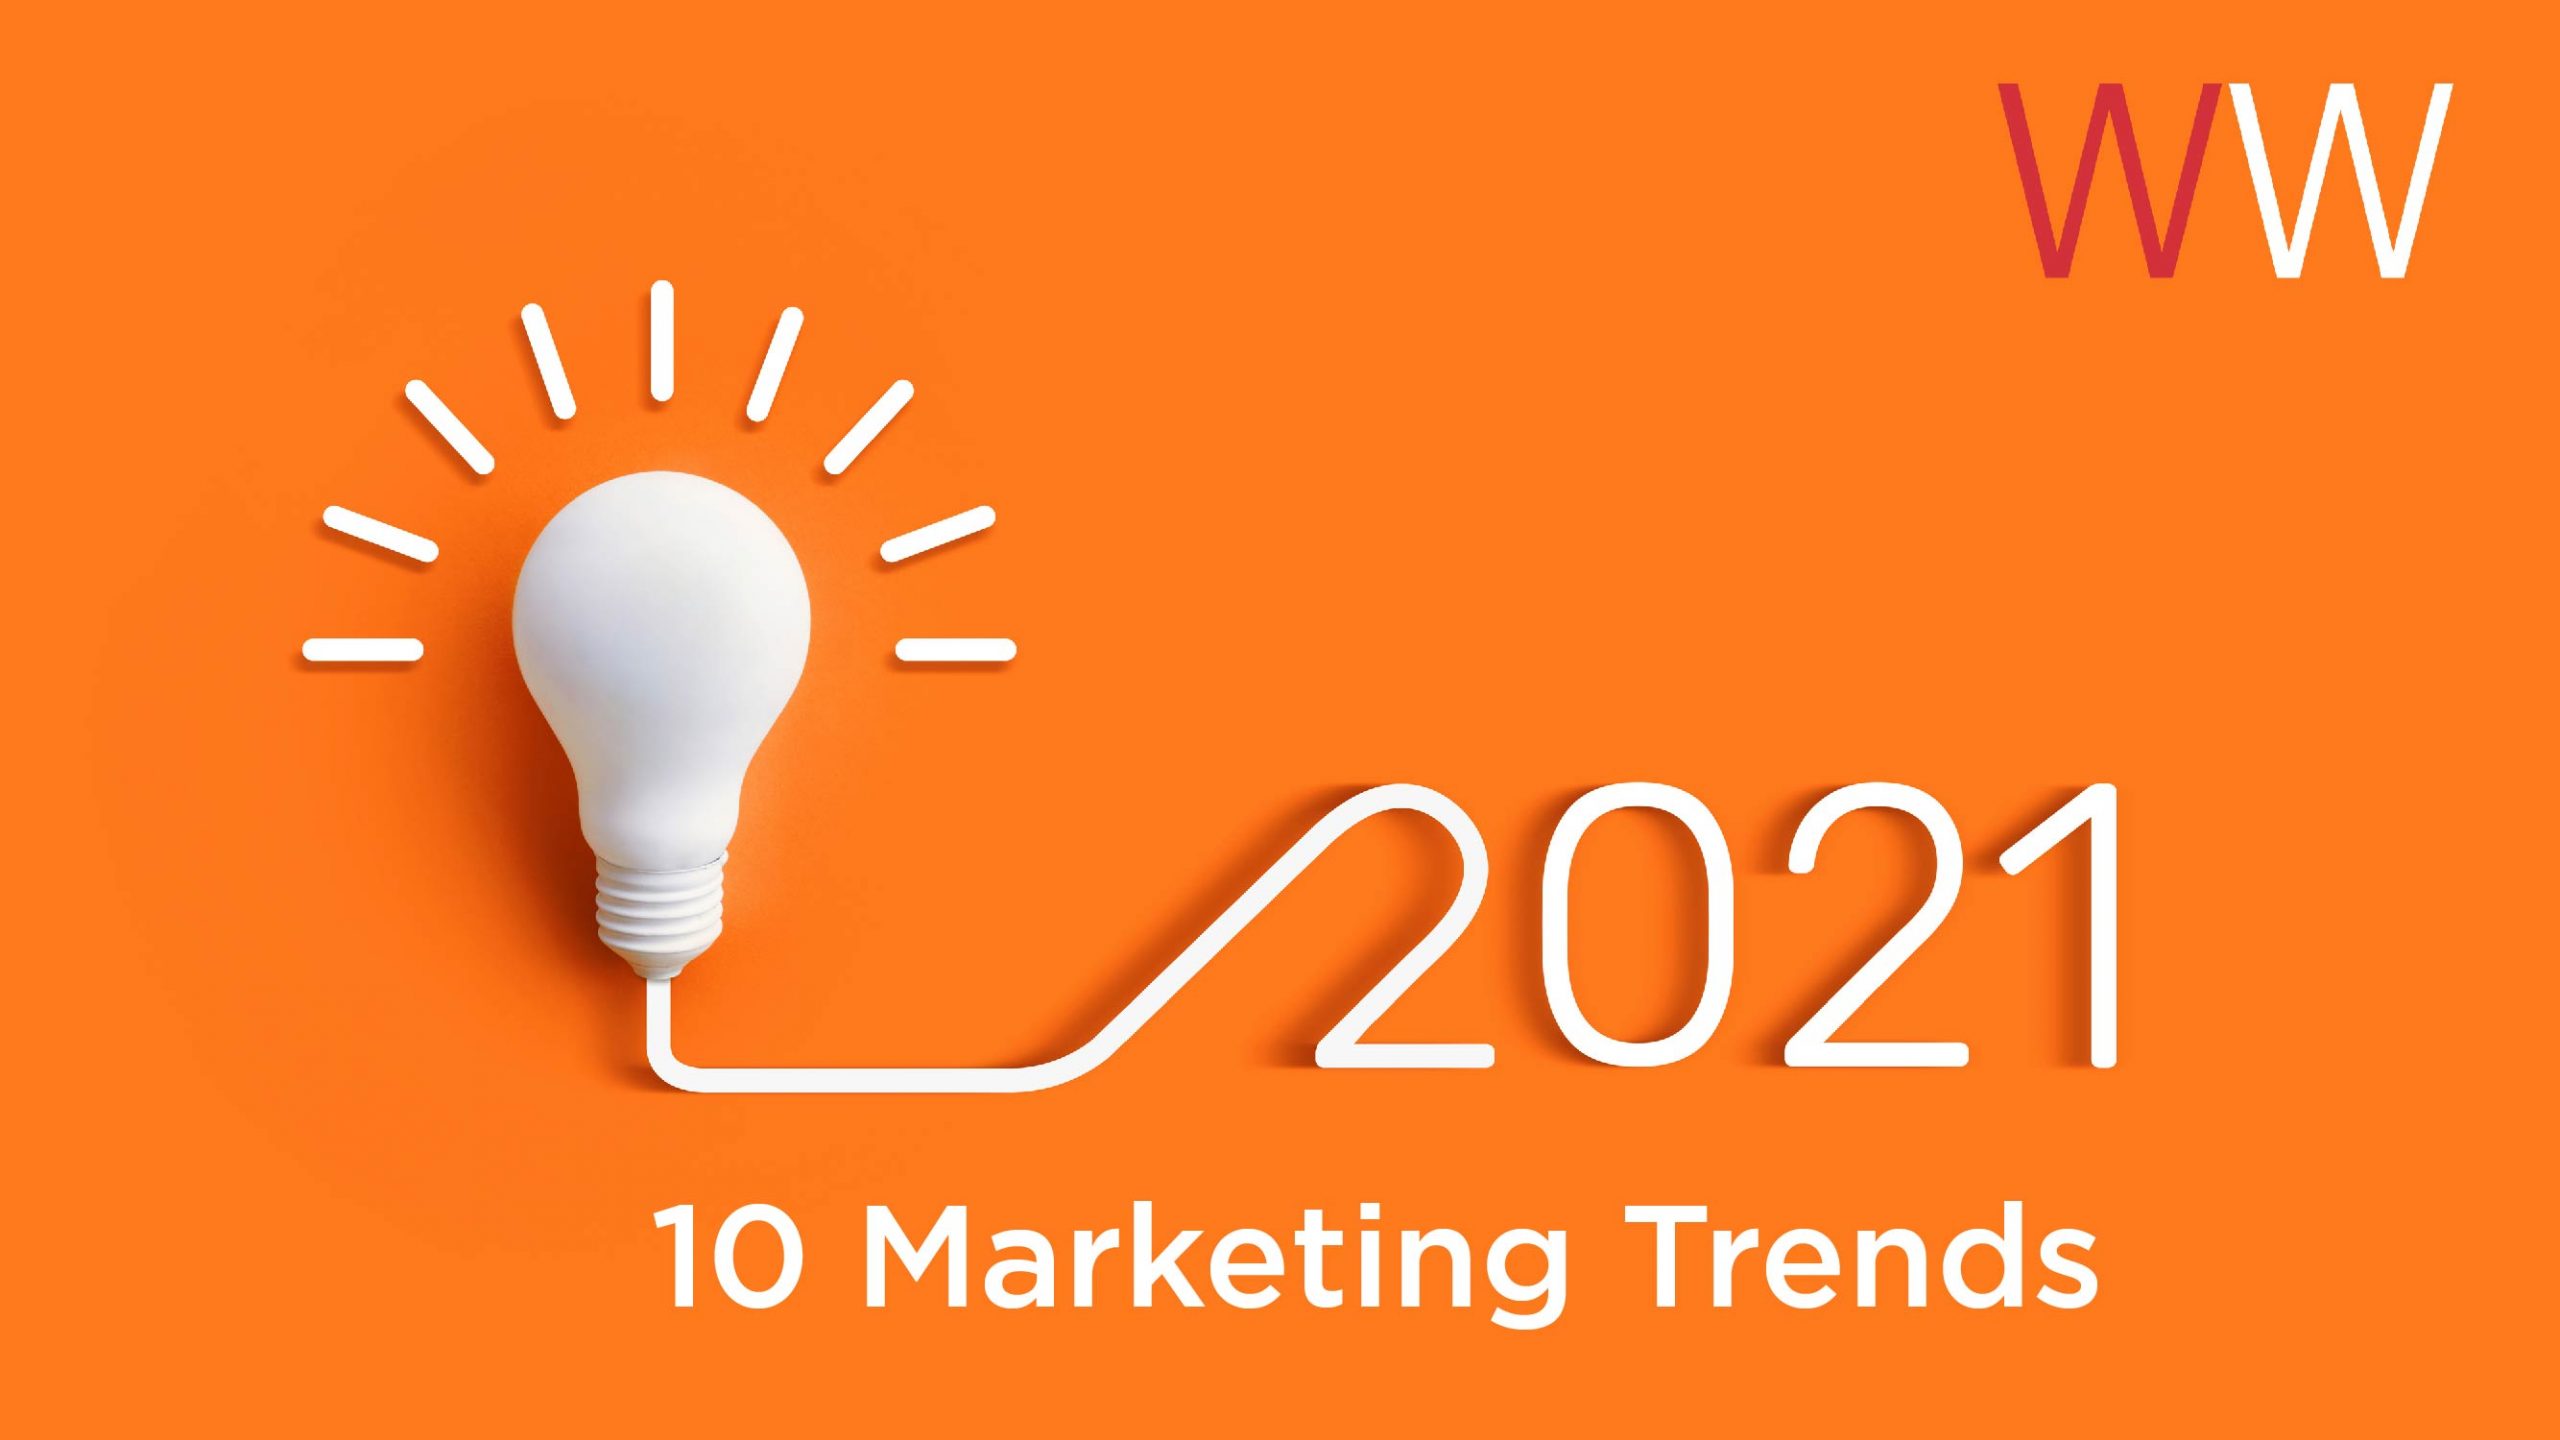 10 Marketing Trends of 2021